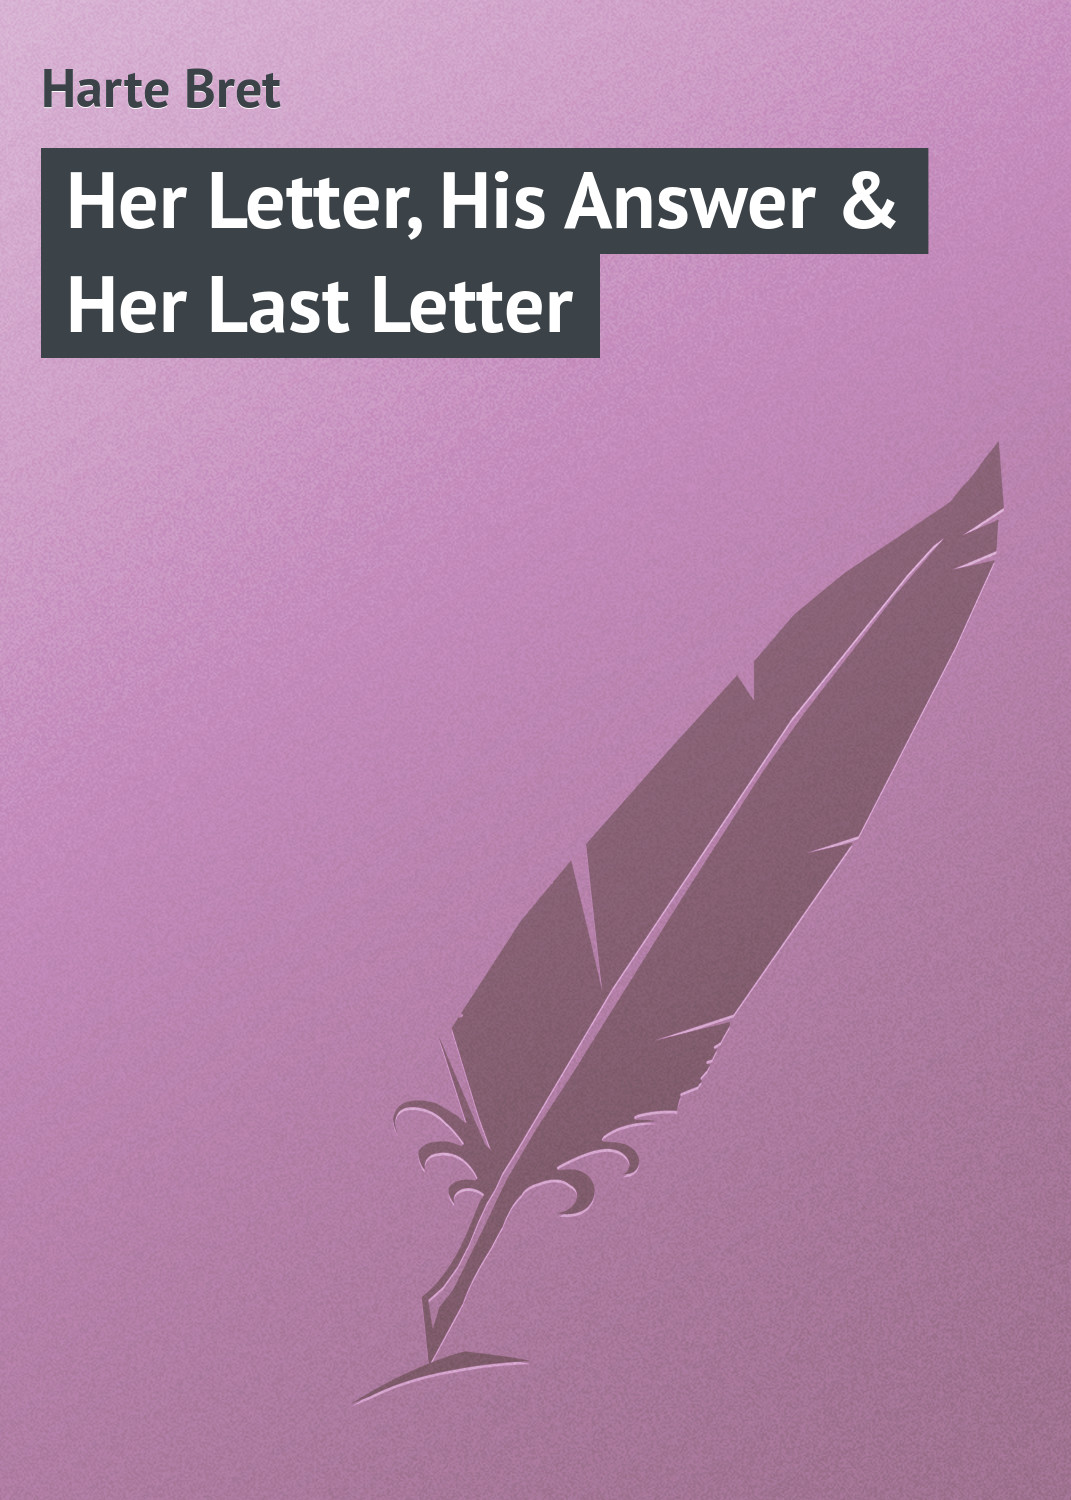 Her Letter, His Answer&Her Last Letter